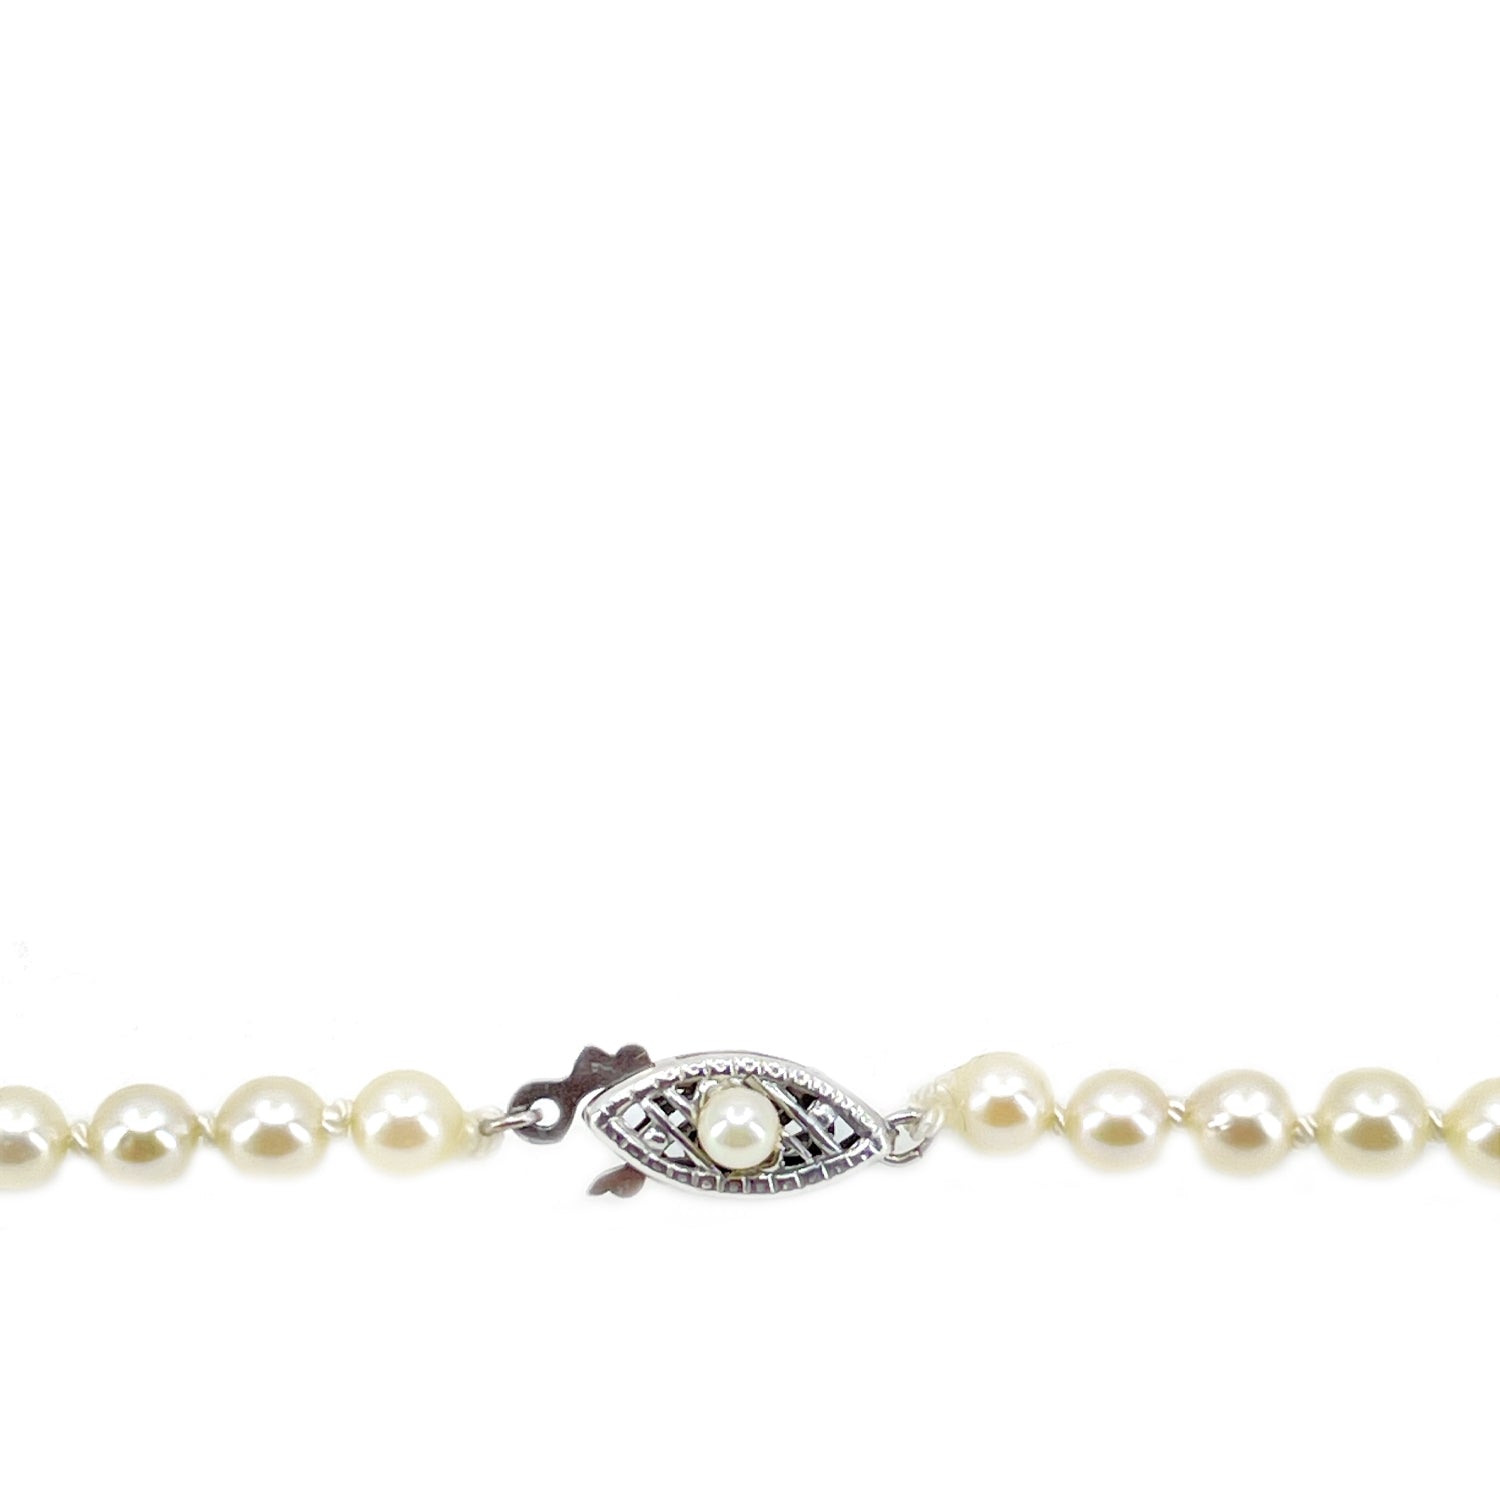 Seed Pearl Japanese Saltwater Cultured Akoya Pearl Strand - 10K White Gold 20 Inch